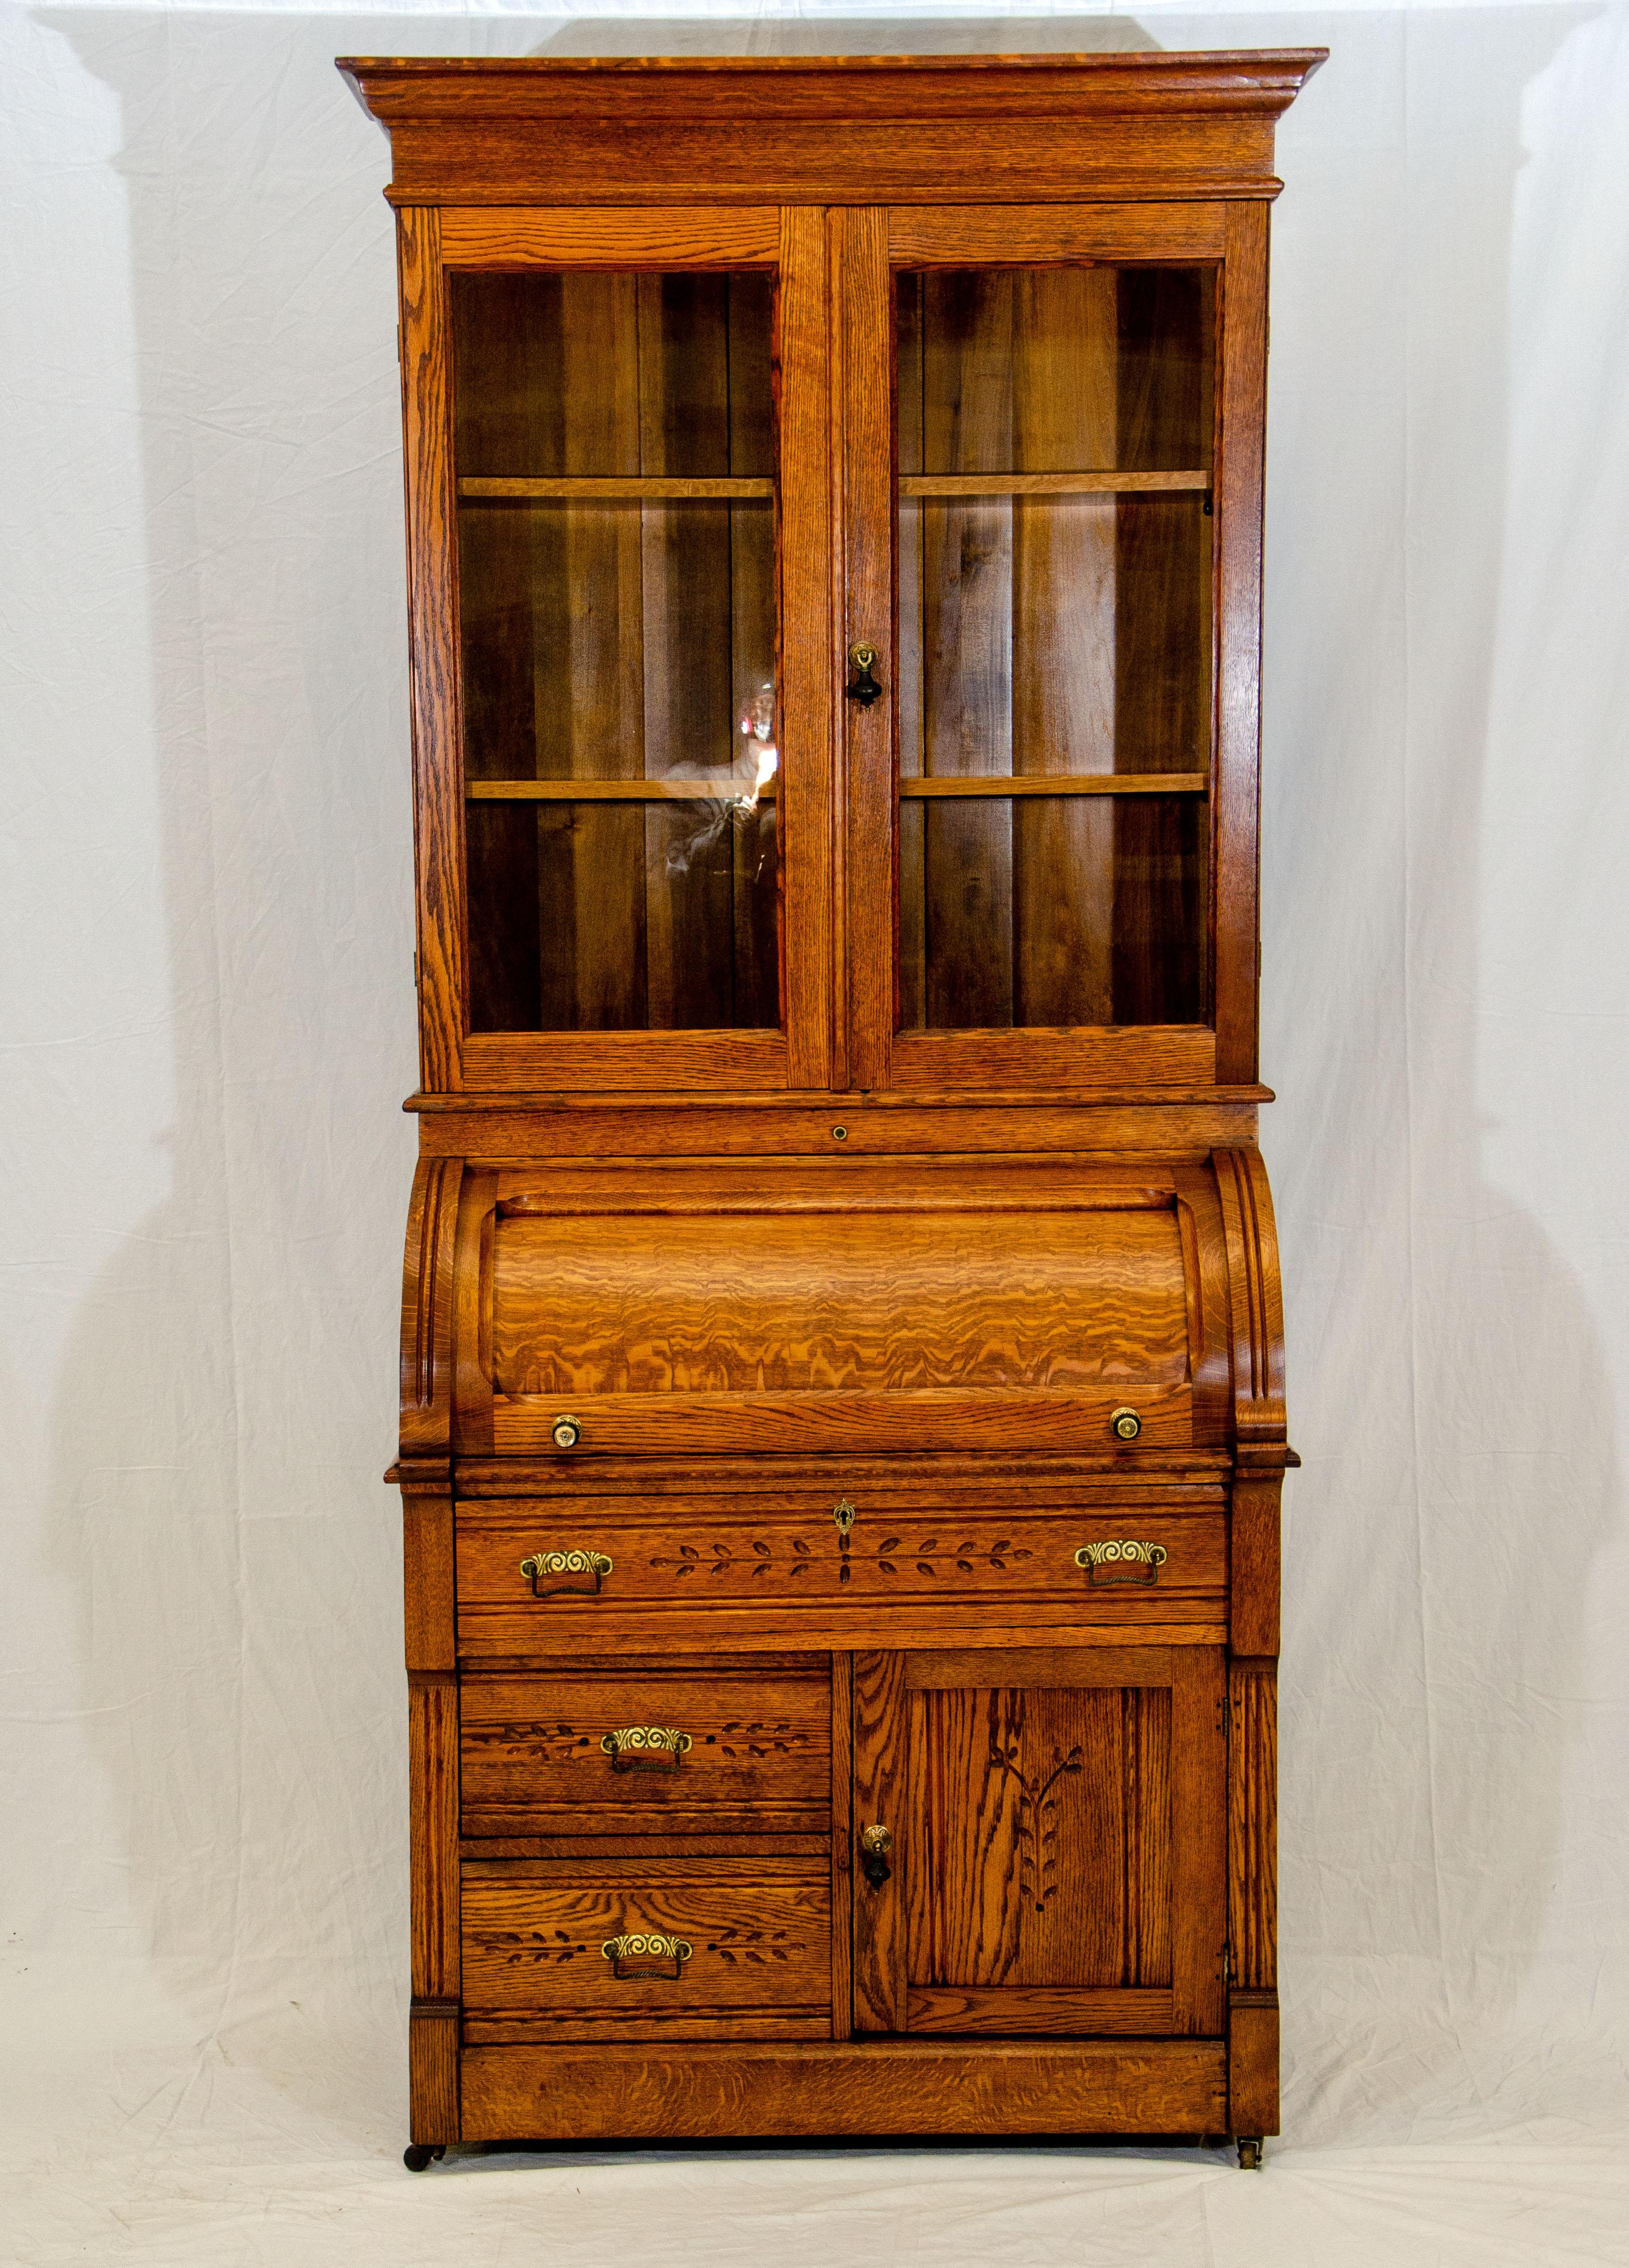 Very nice Eastlake Victorian oak cylinder desk with a bookcase top section. The drawers and door fronts are Eastlake spoon carved. The oak is both quarter-sawn and straight grain. The bookcase top is 42 1/2